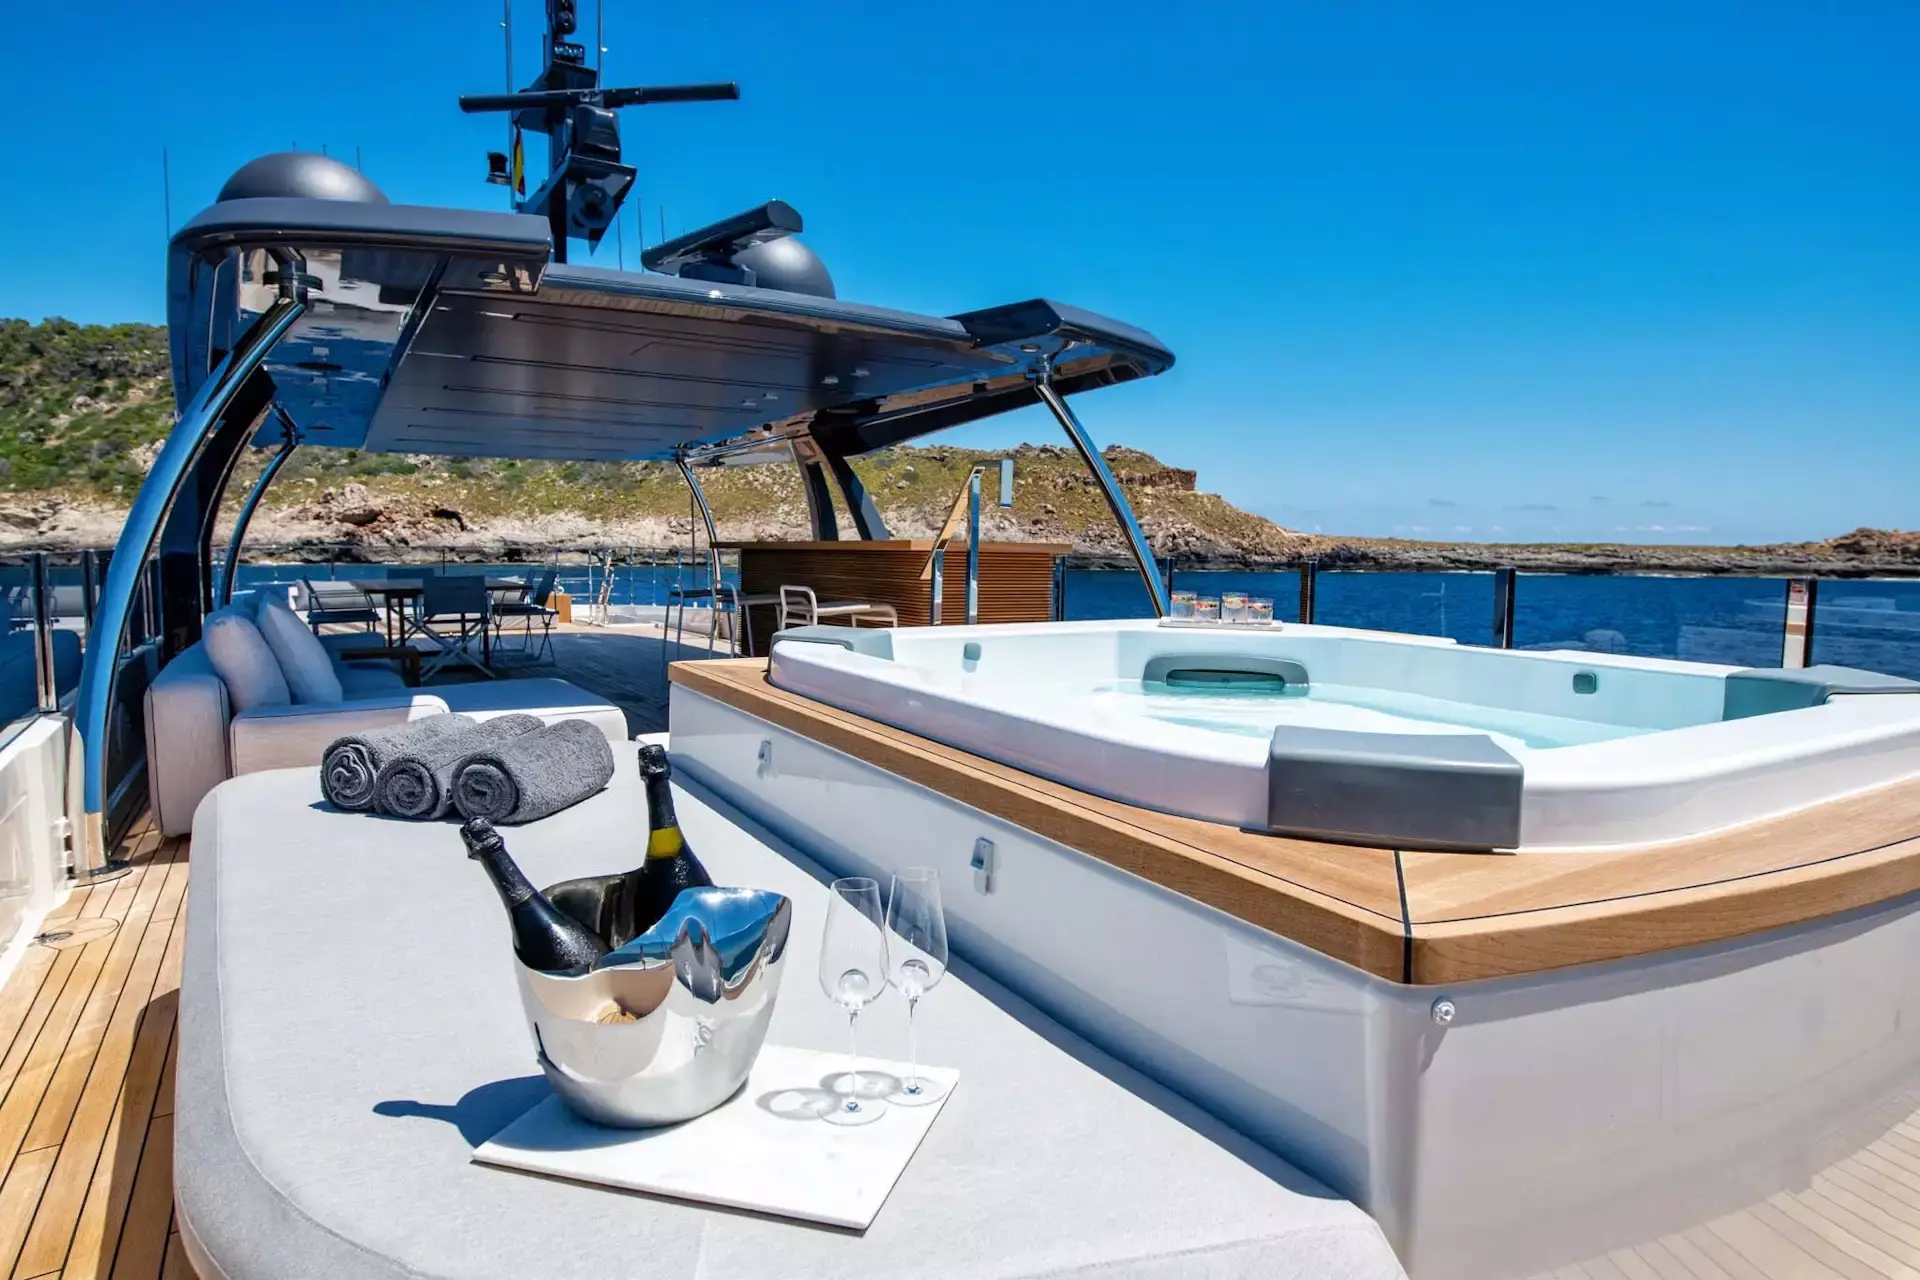 Paloma by Custom Line - Top rates for a Charter of a private Superyacht in Monaco